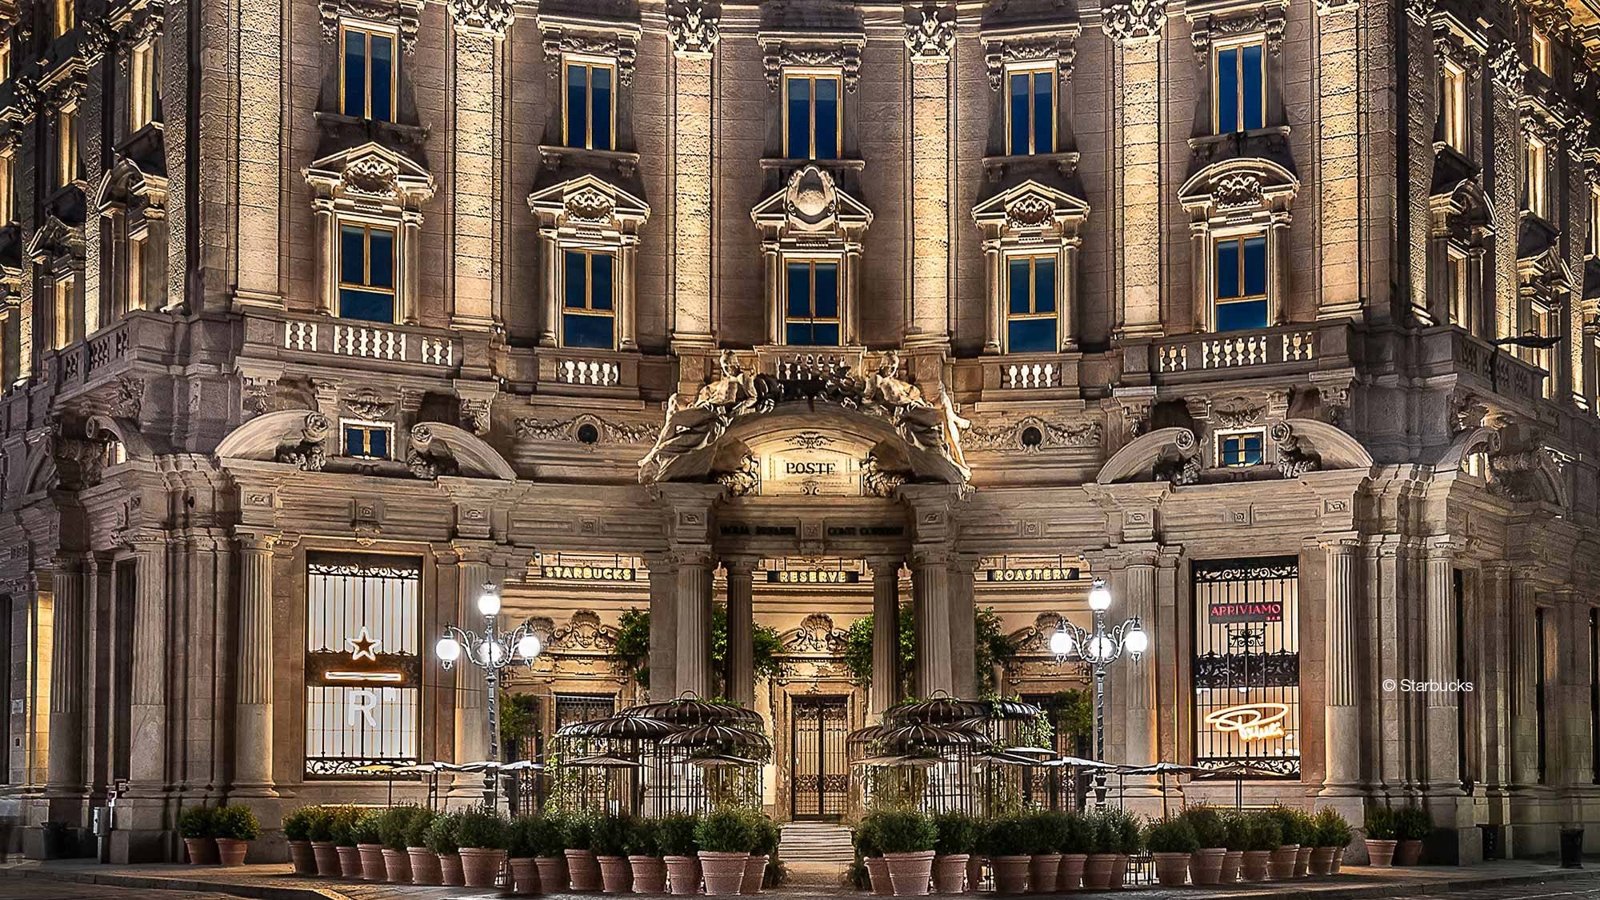 Exterior of the Starbucks Reserve Roastery and Tasting Room in Milan. Credit: Starbucks